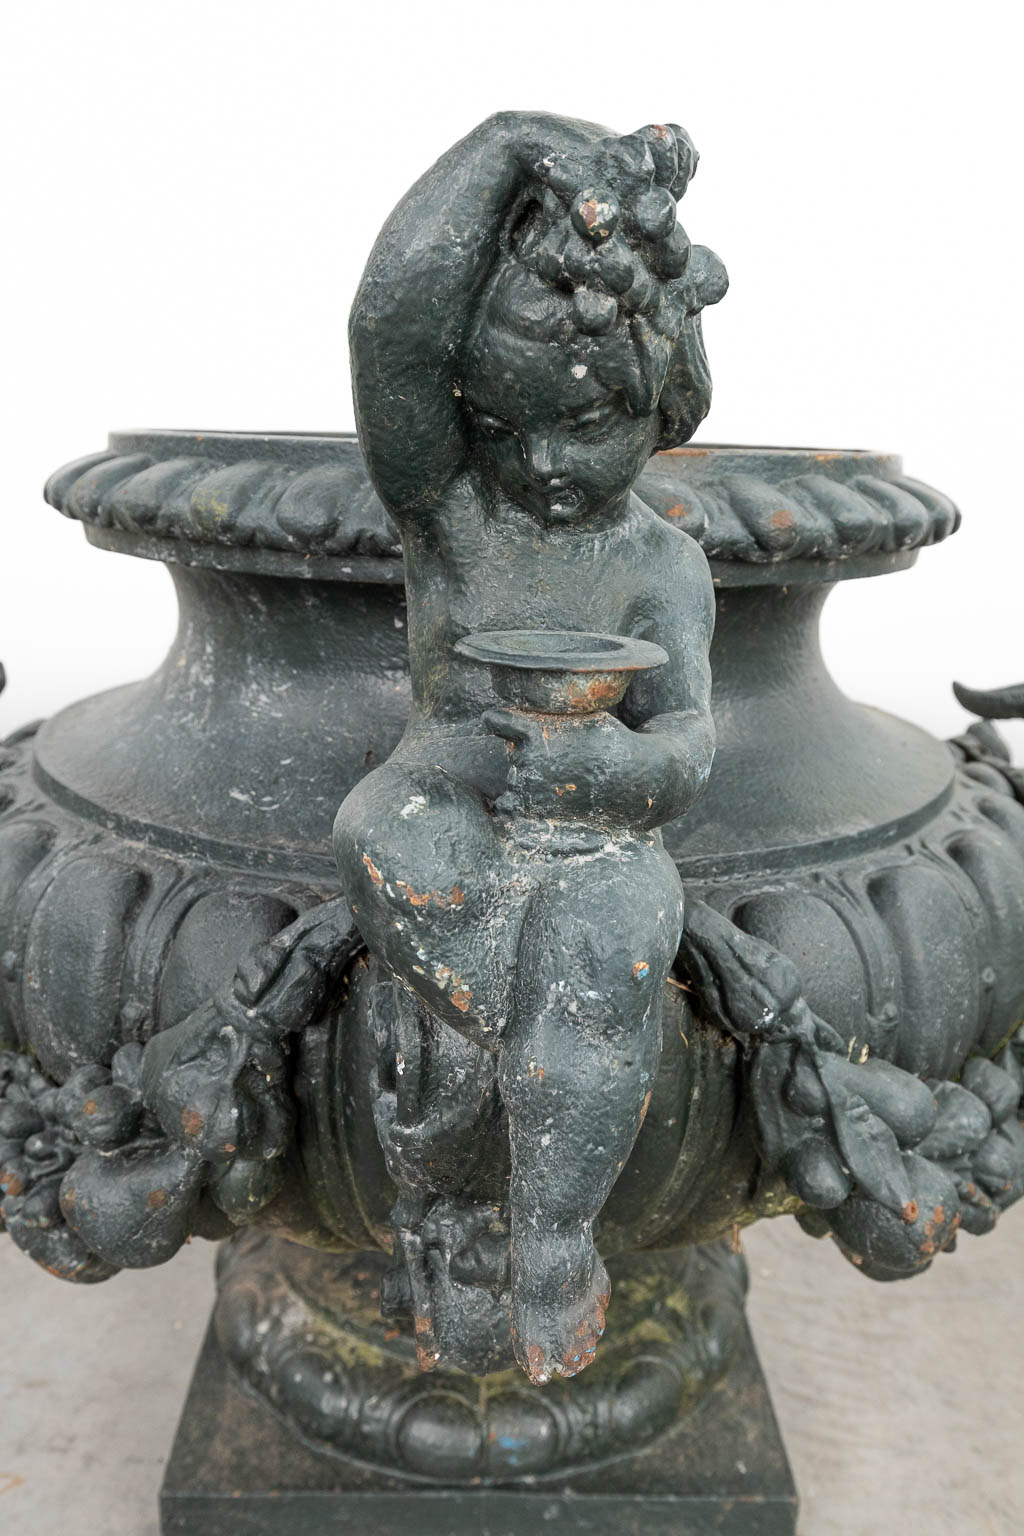 A set of 3 large garden vases made of cast iron, decorated with putti and ram